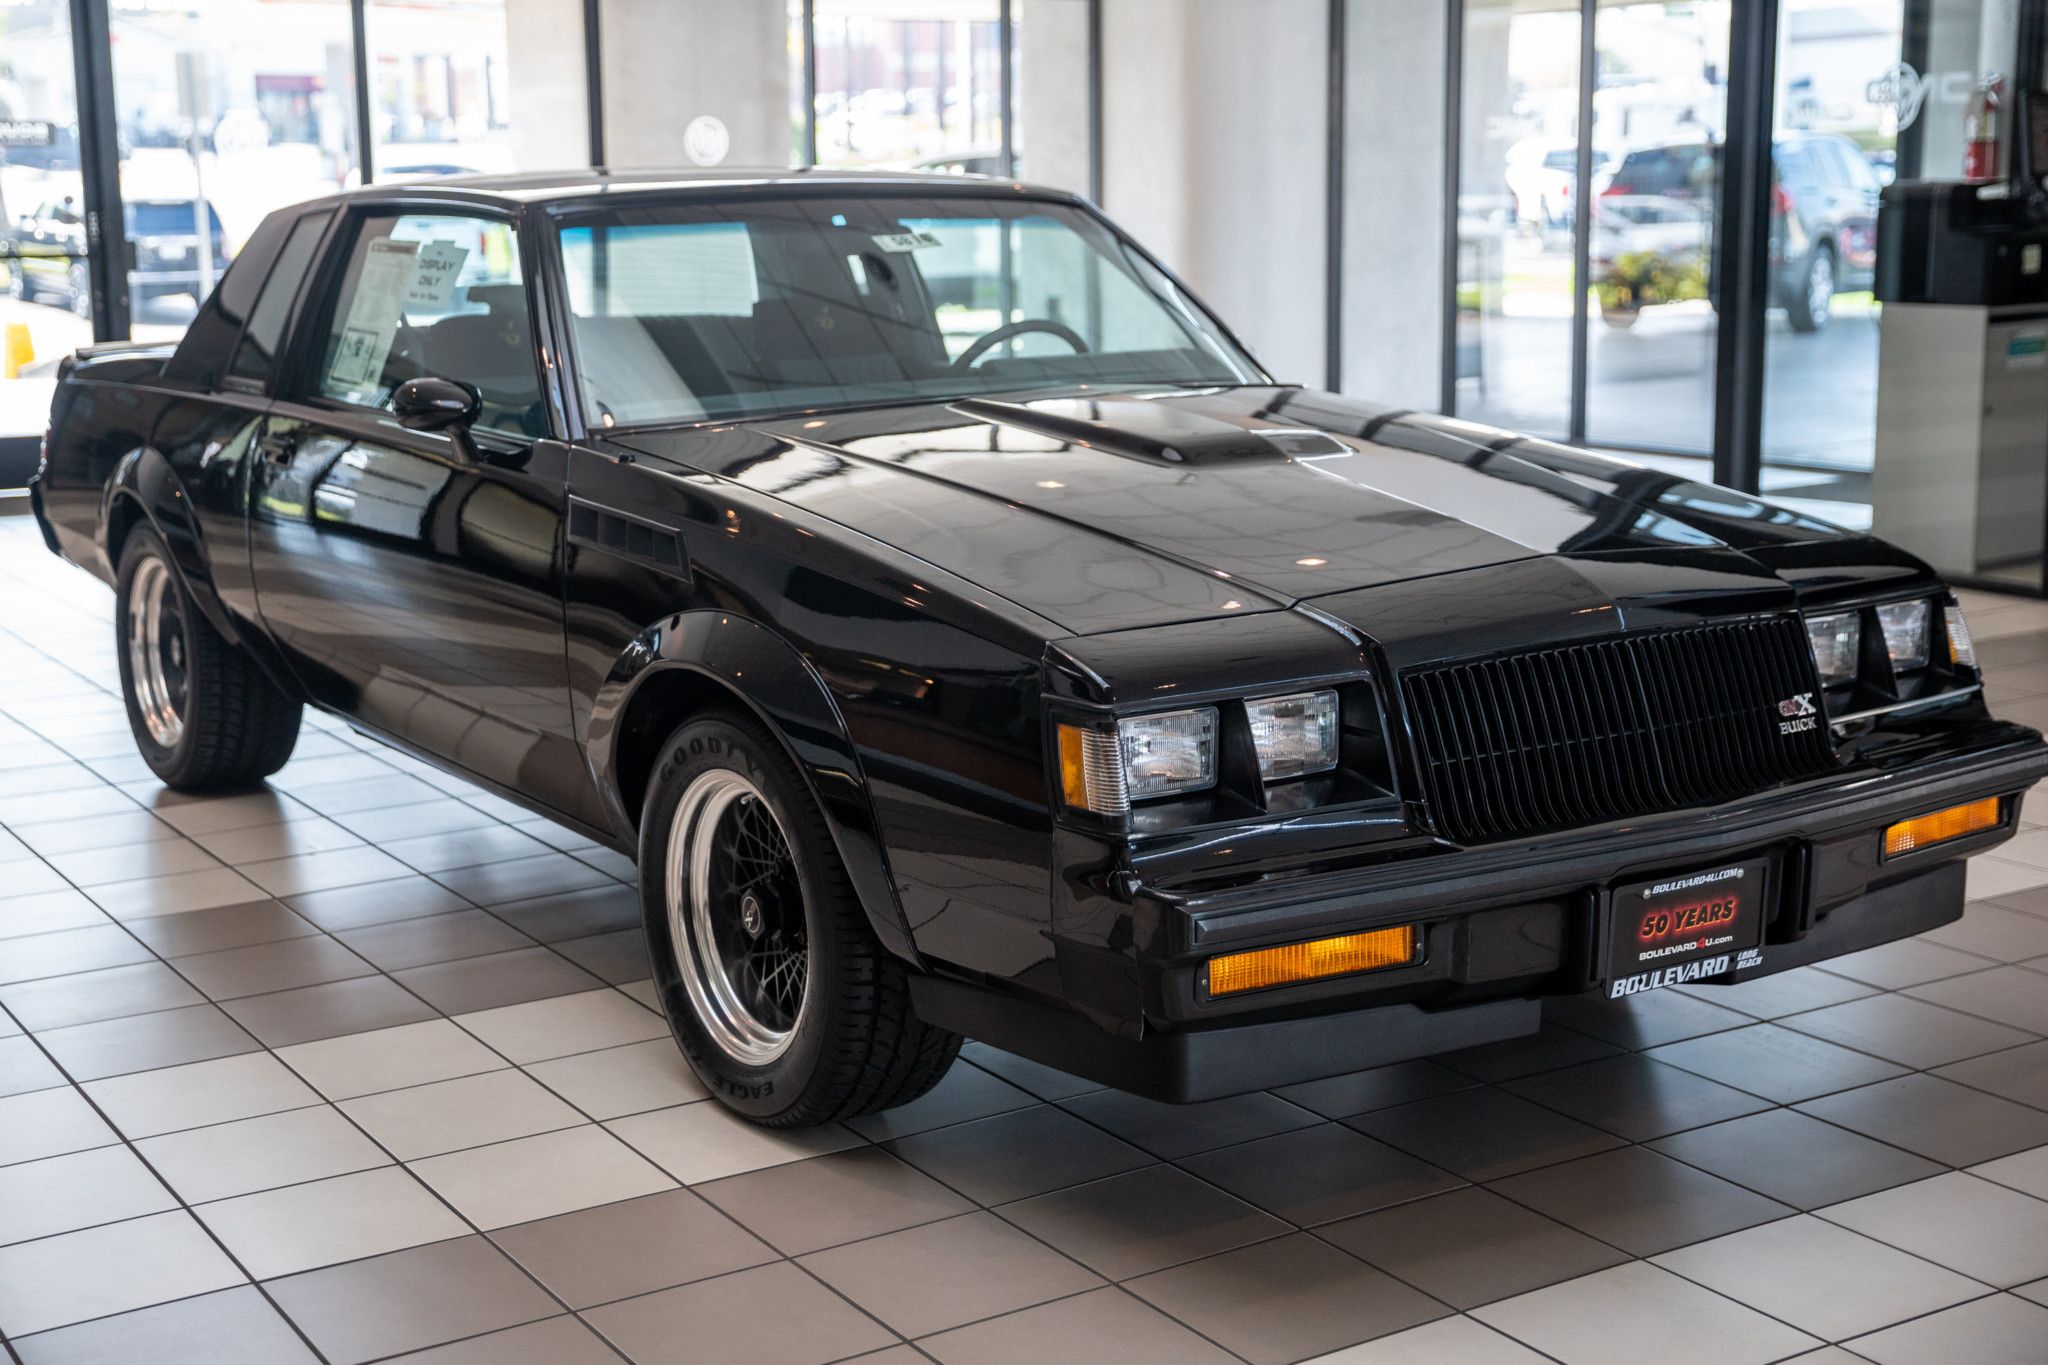 1987 Buick GNX in a showroom